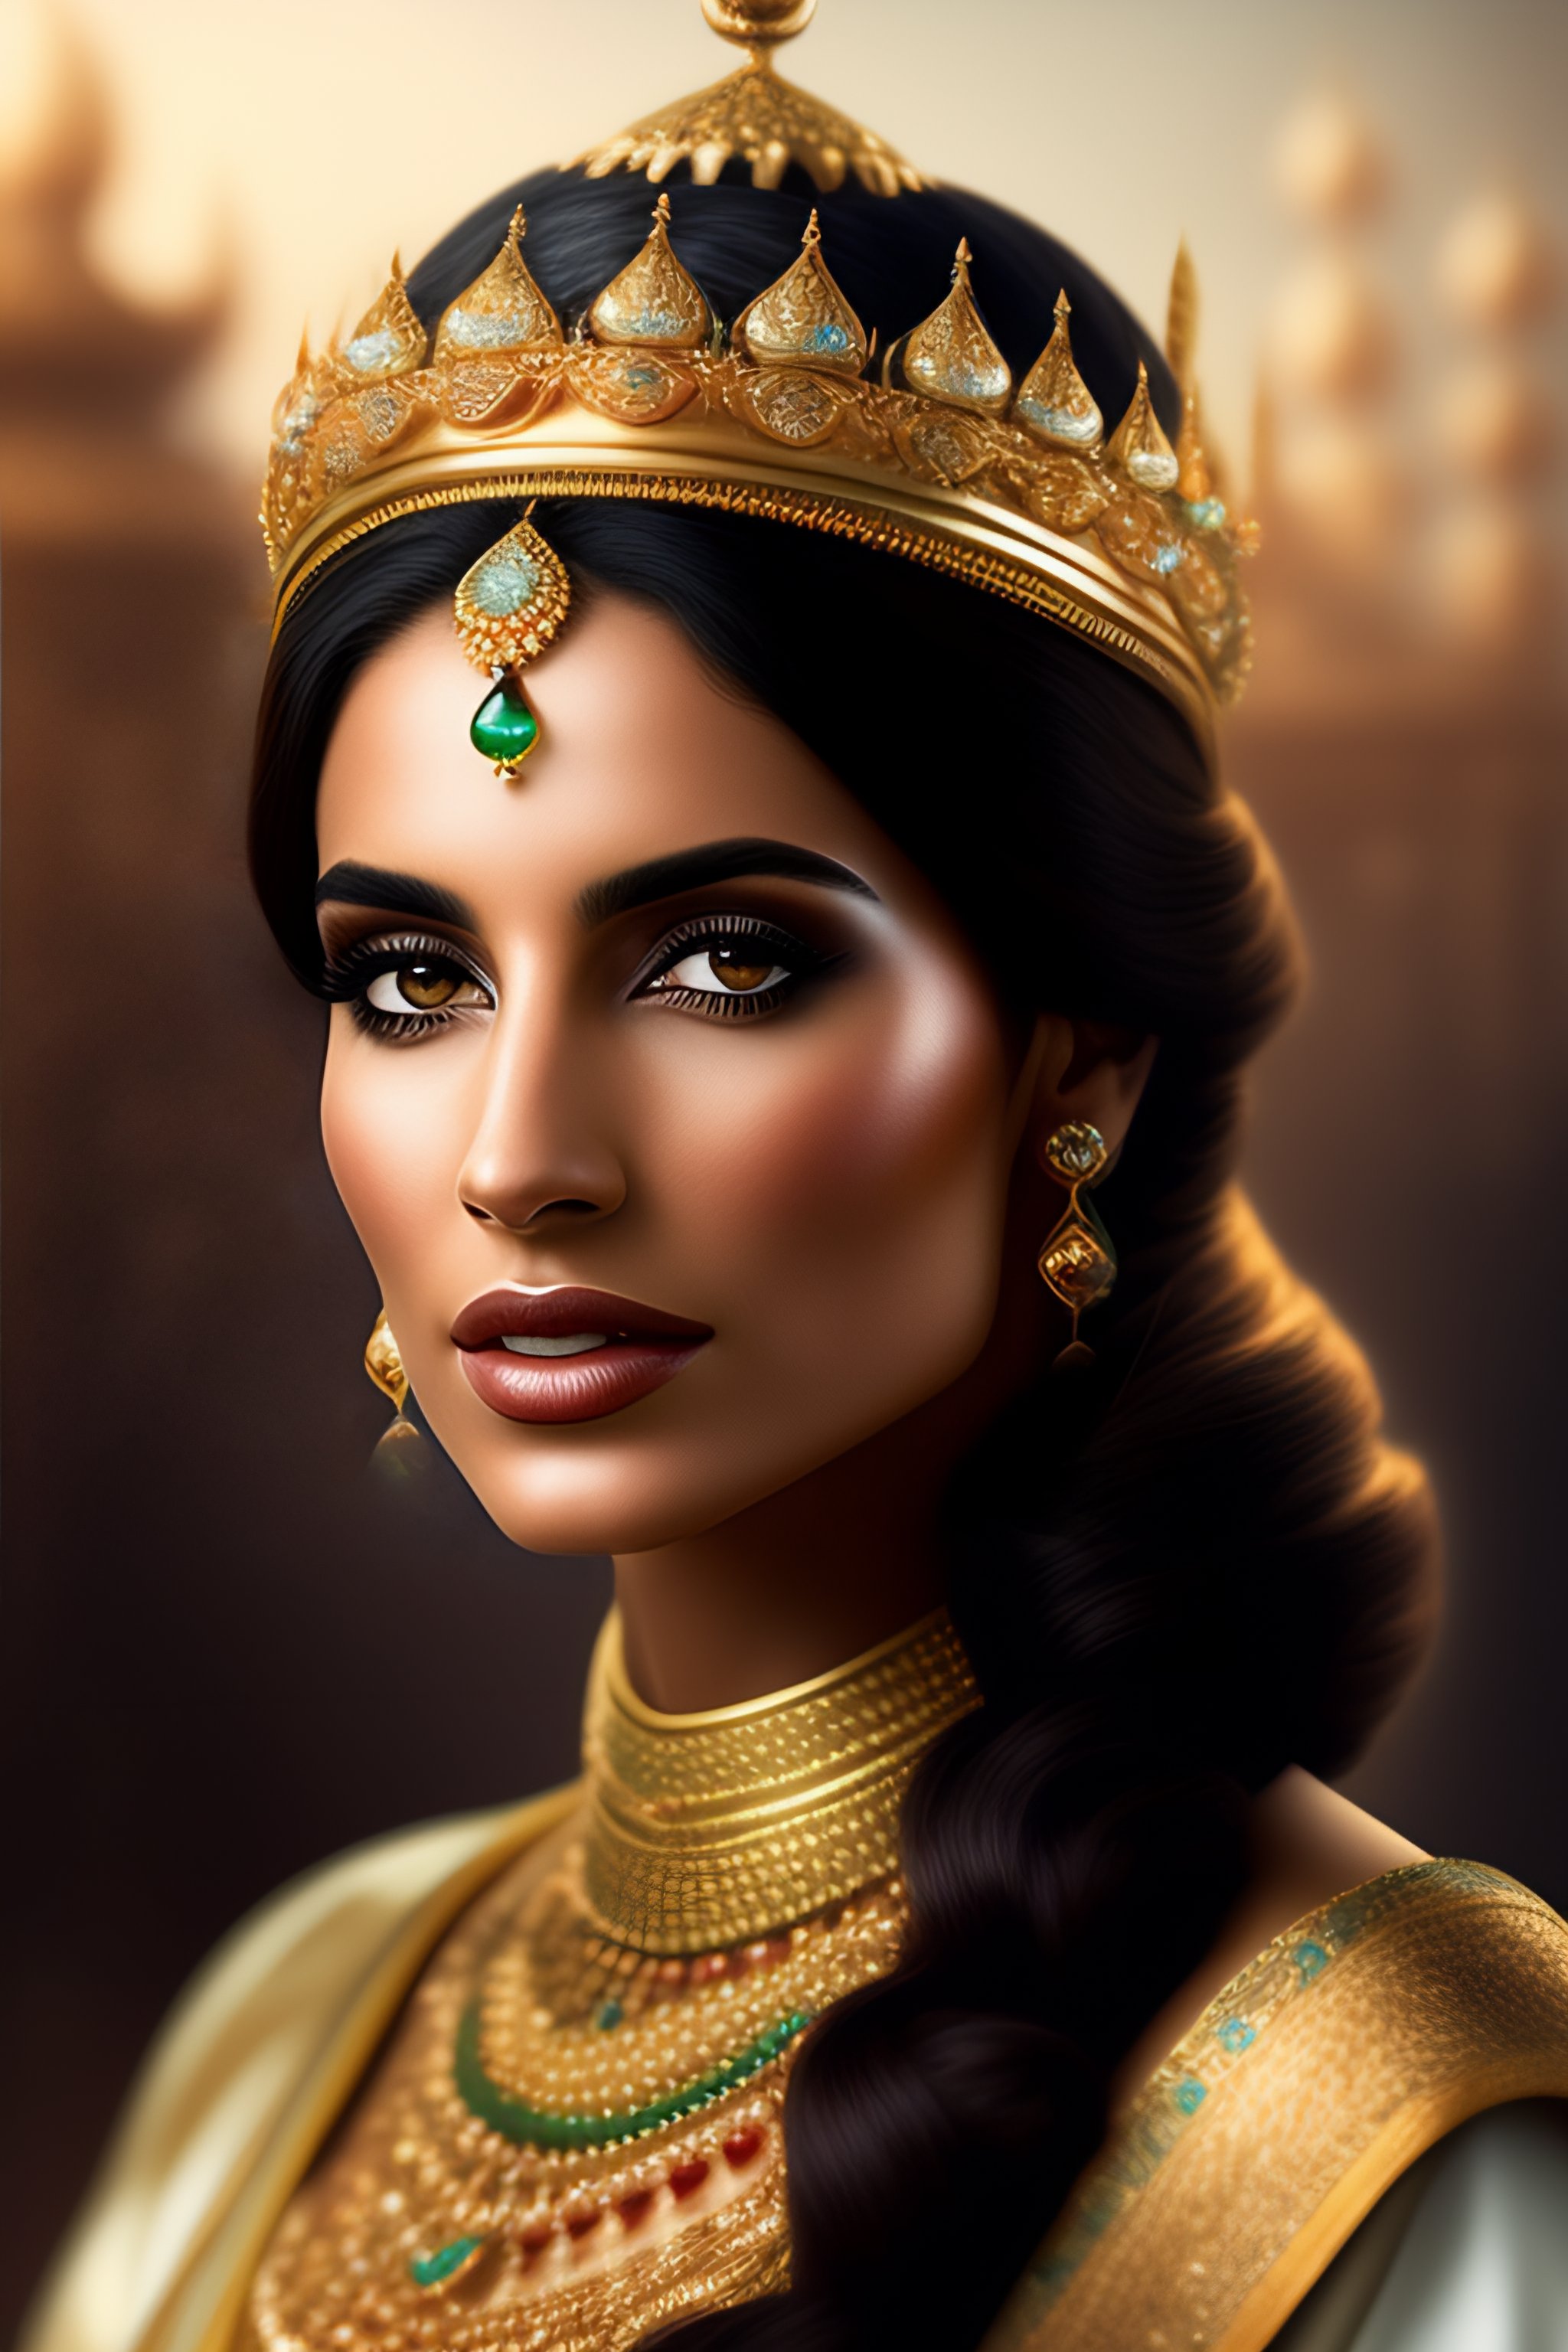 Lexica - An arab princess wearing a crown made of glass